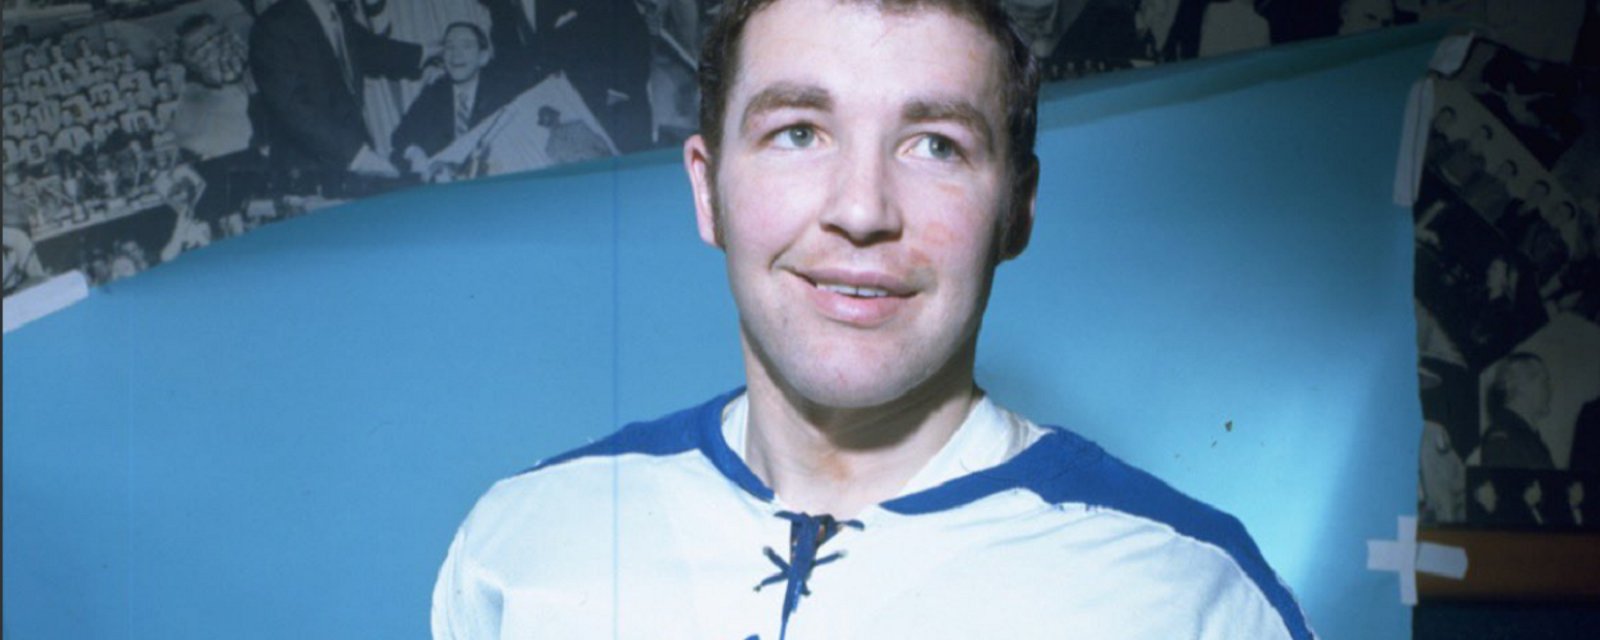 Former Stanley Cup champion Billy MacMillan has died.